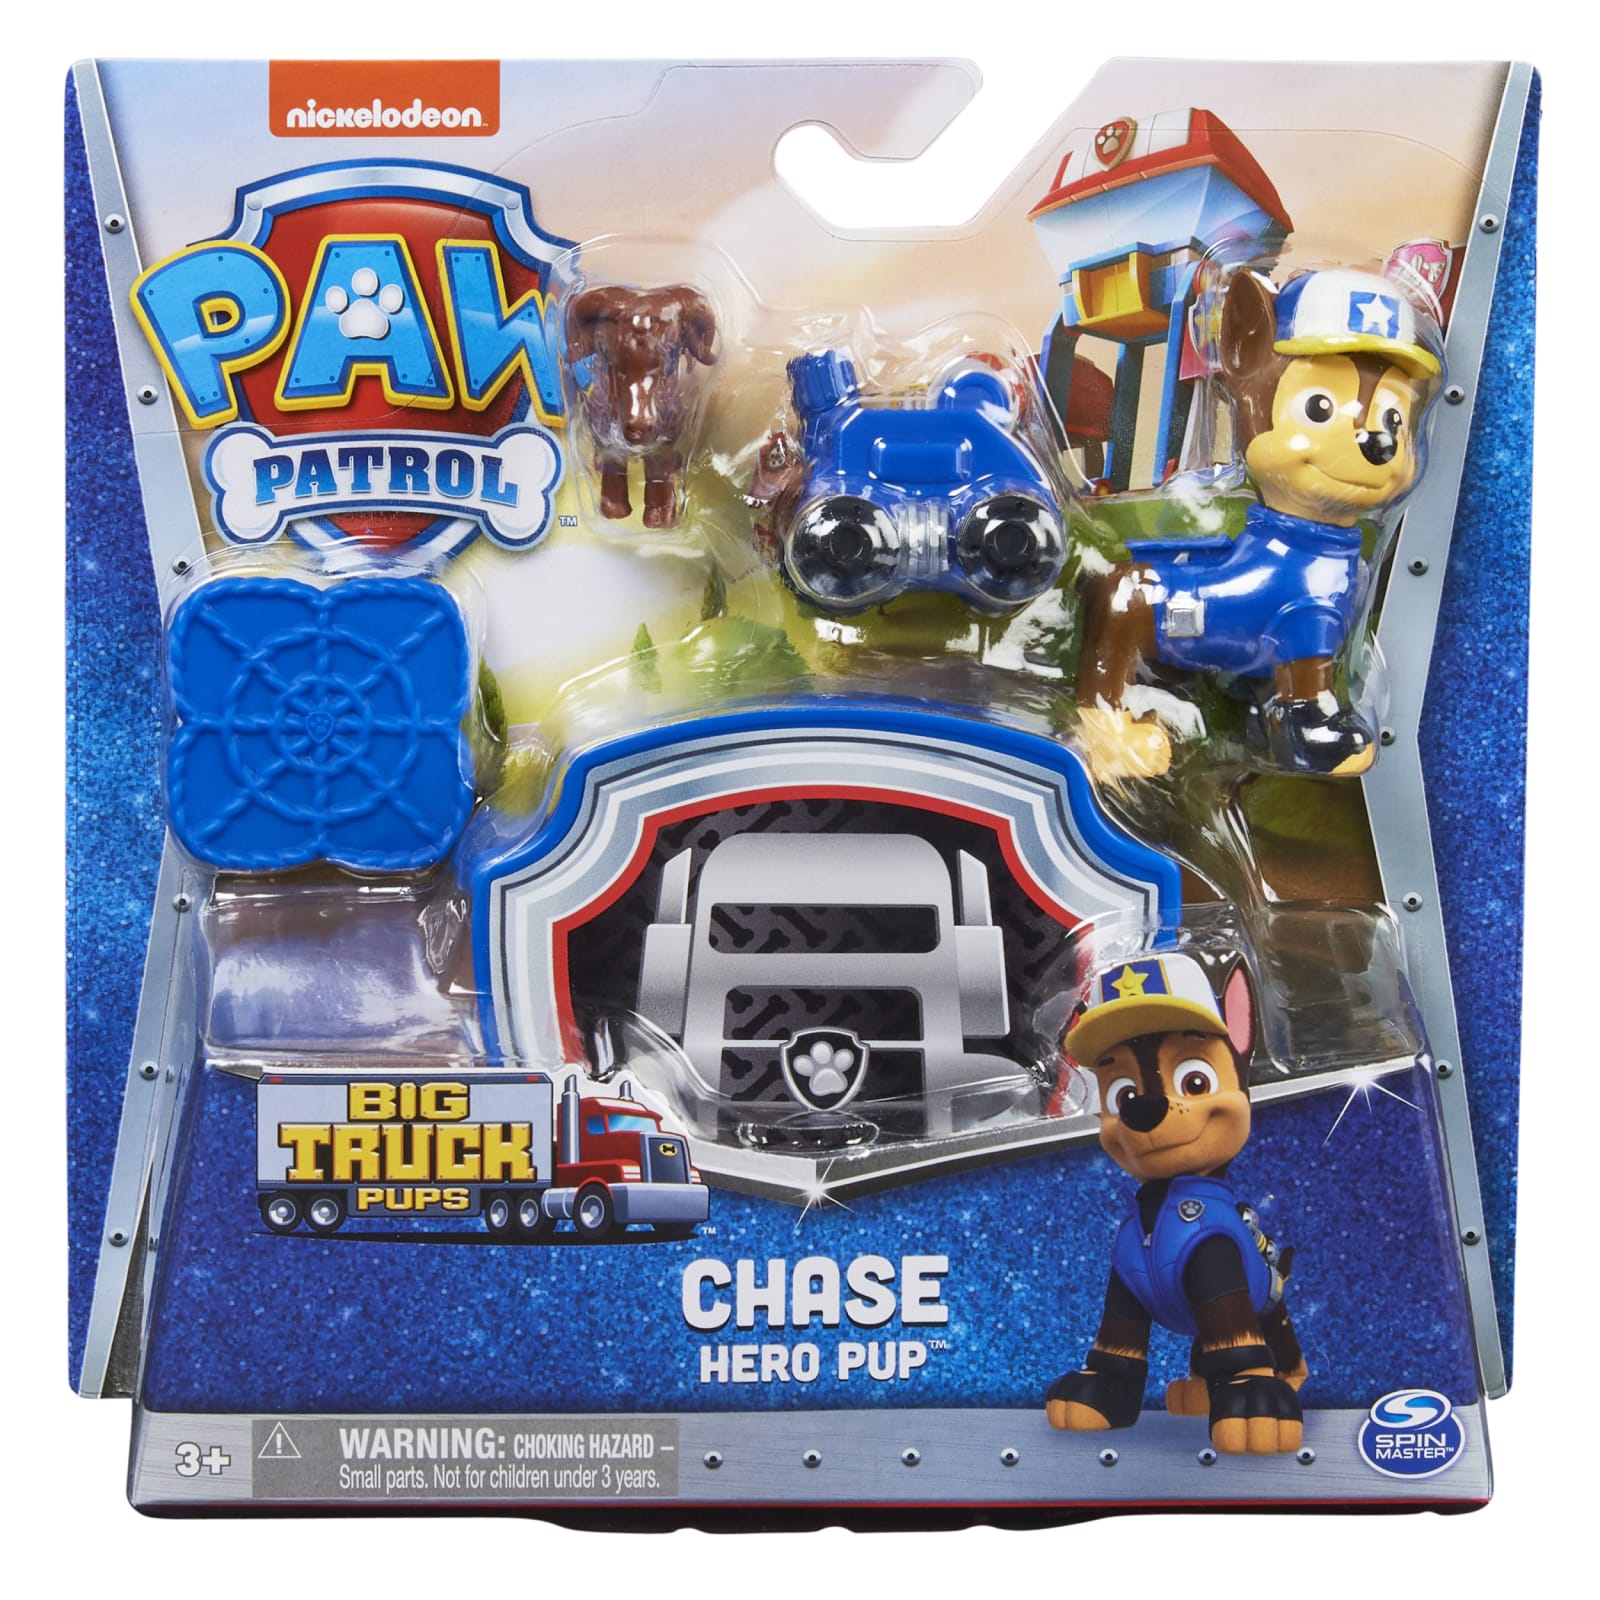 PAW Patrol Chase Hero Pup Big Truck Pups - Assorted by Spin Master